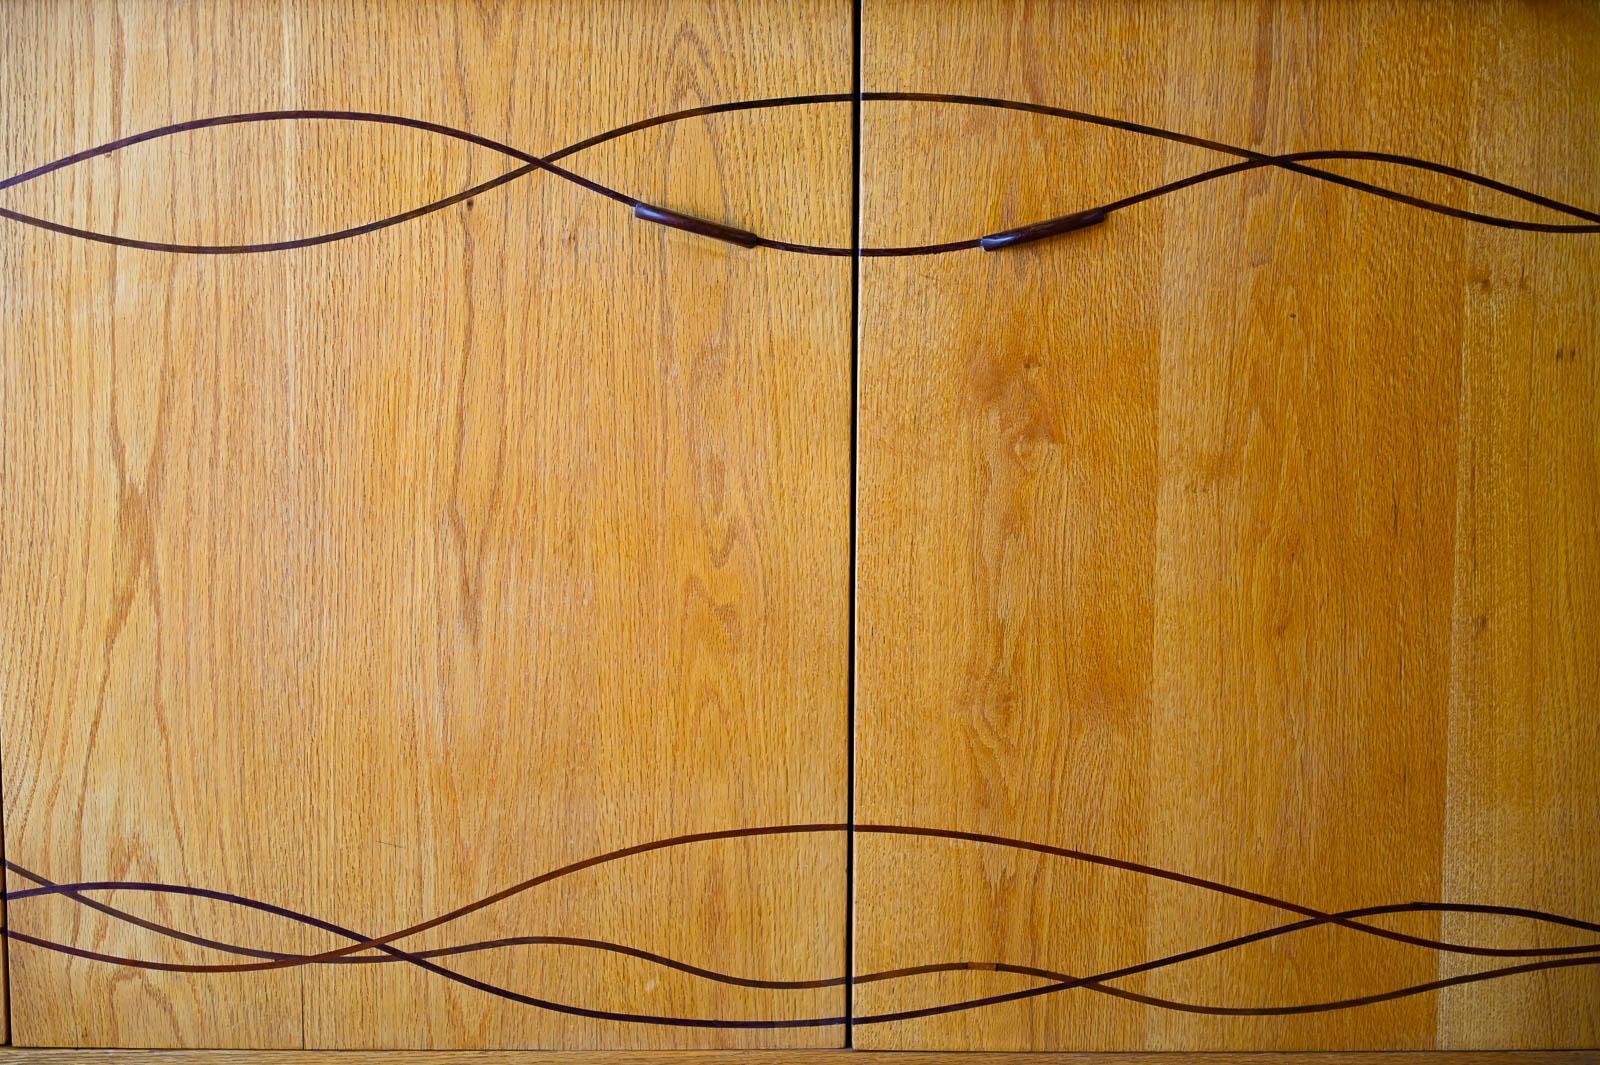 Cherry Bespoke Cabinet with Carved Inlay by Robert Squire Bierbaum, 1995 For Sale